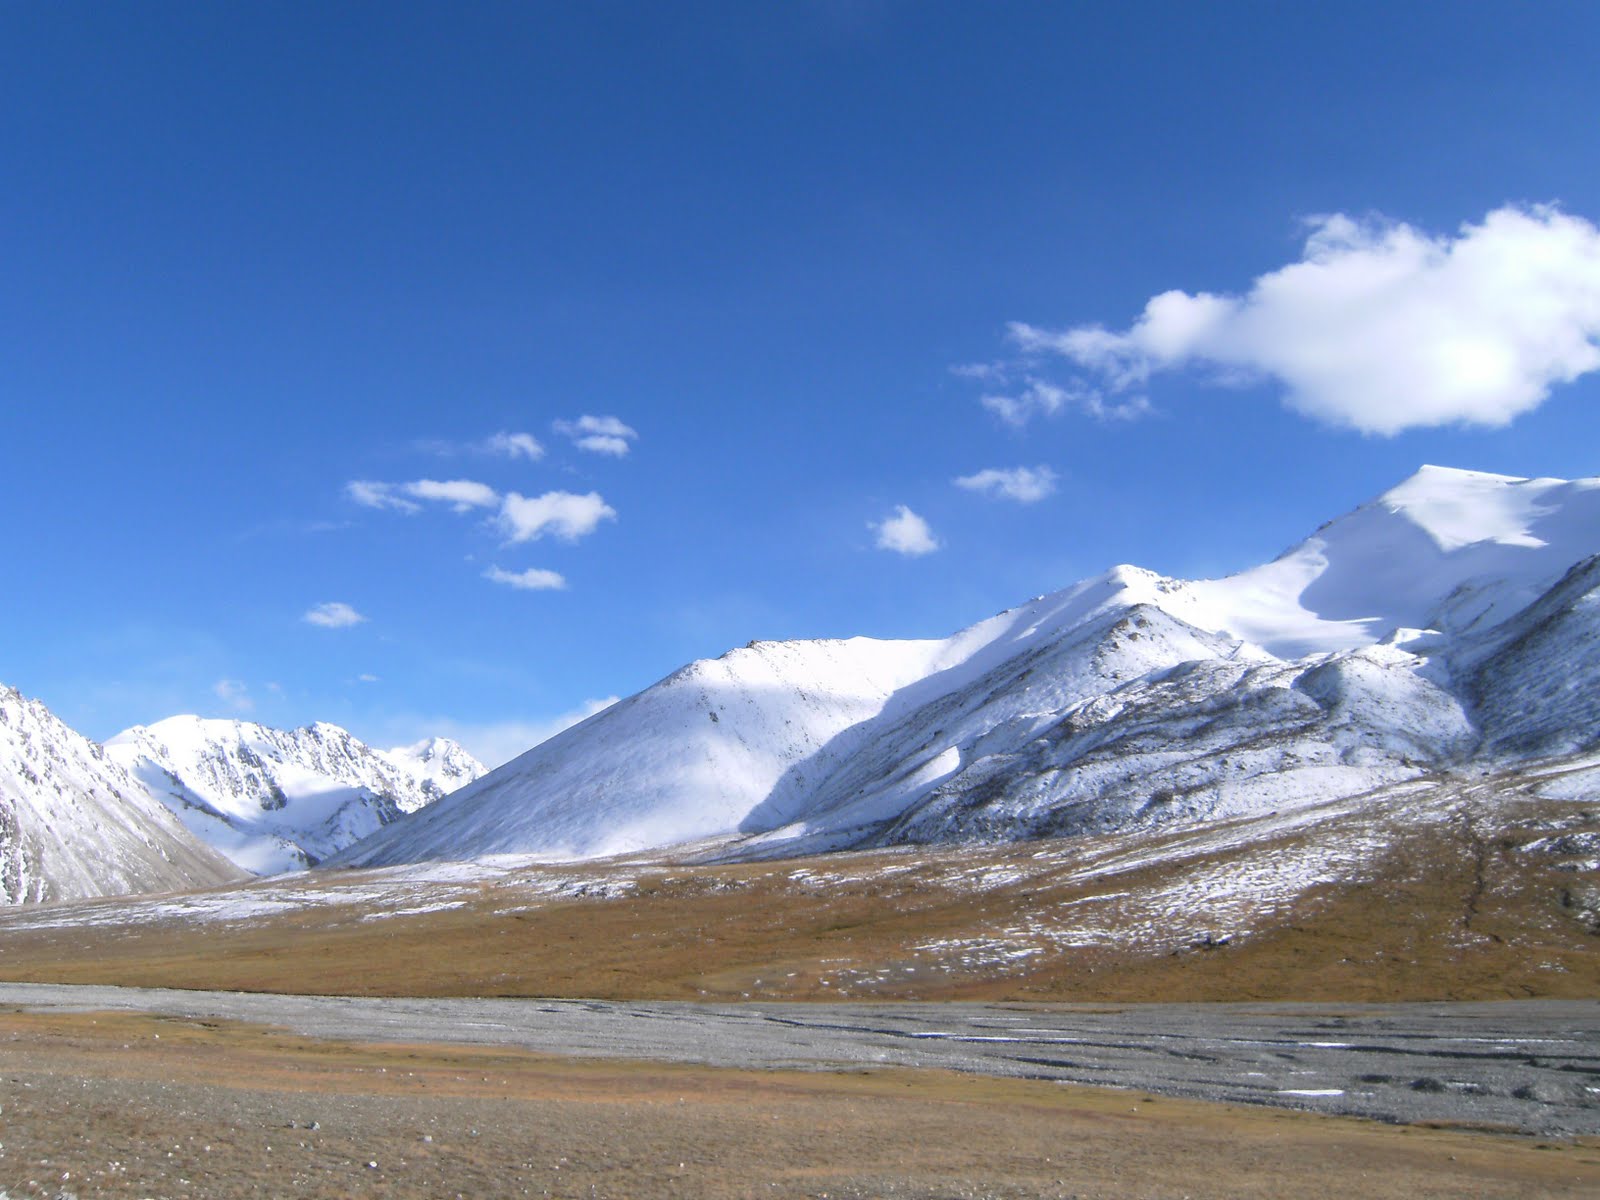 The Khunjerab Top, as it is famously known, is a plateau-like land 